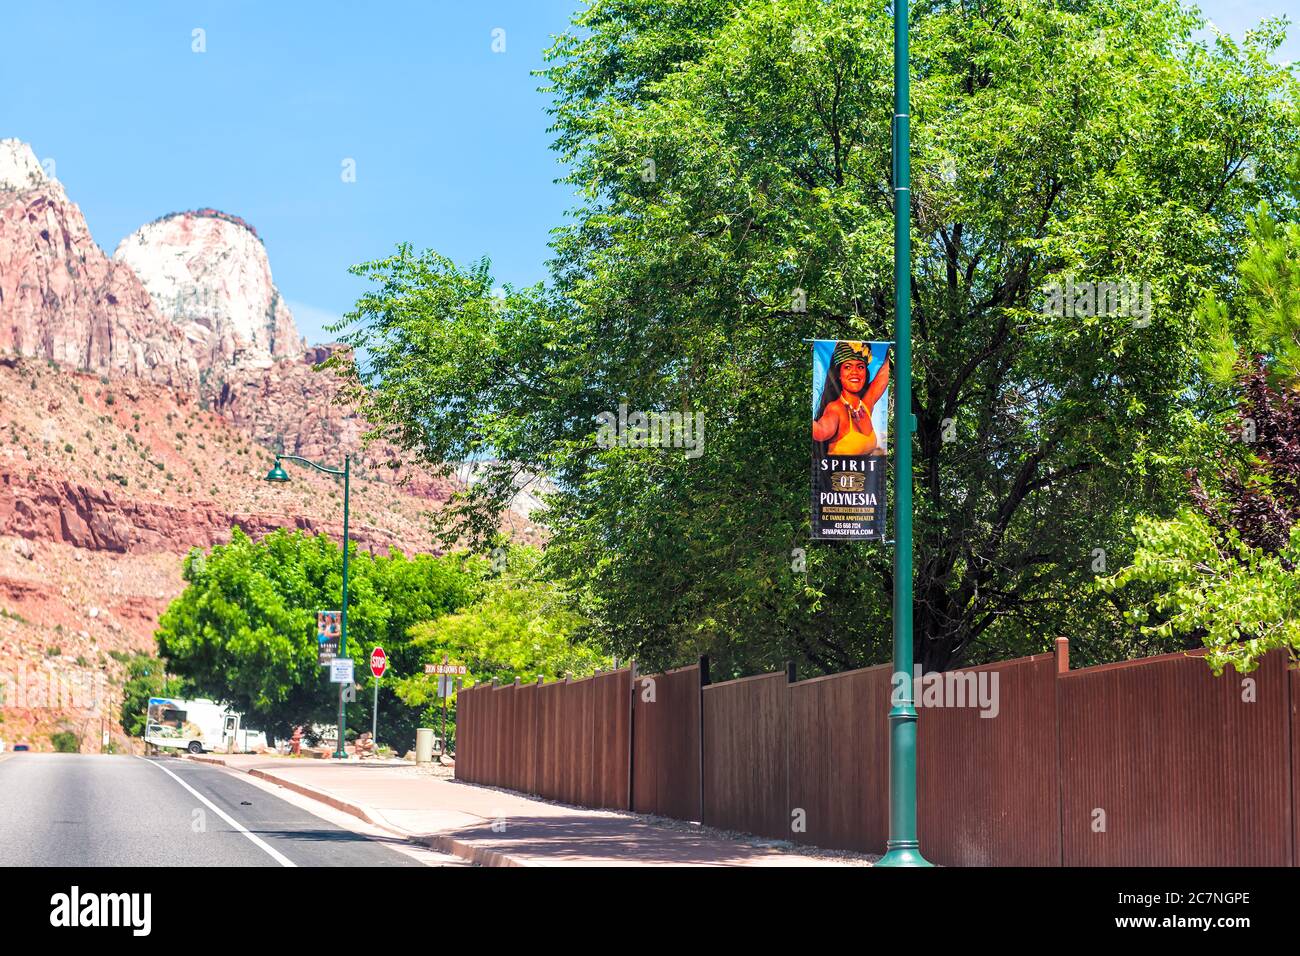 Springdale, USA - August 5, 2019: Zion National Park road street in Utah and town city sign banner on lamp post for advertisement for Spirit of Polyne Stock Photo